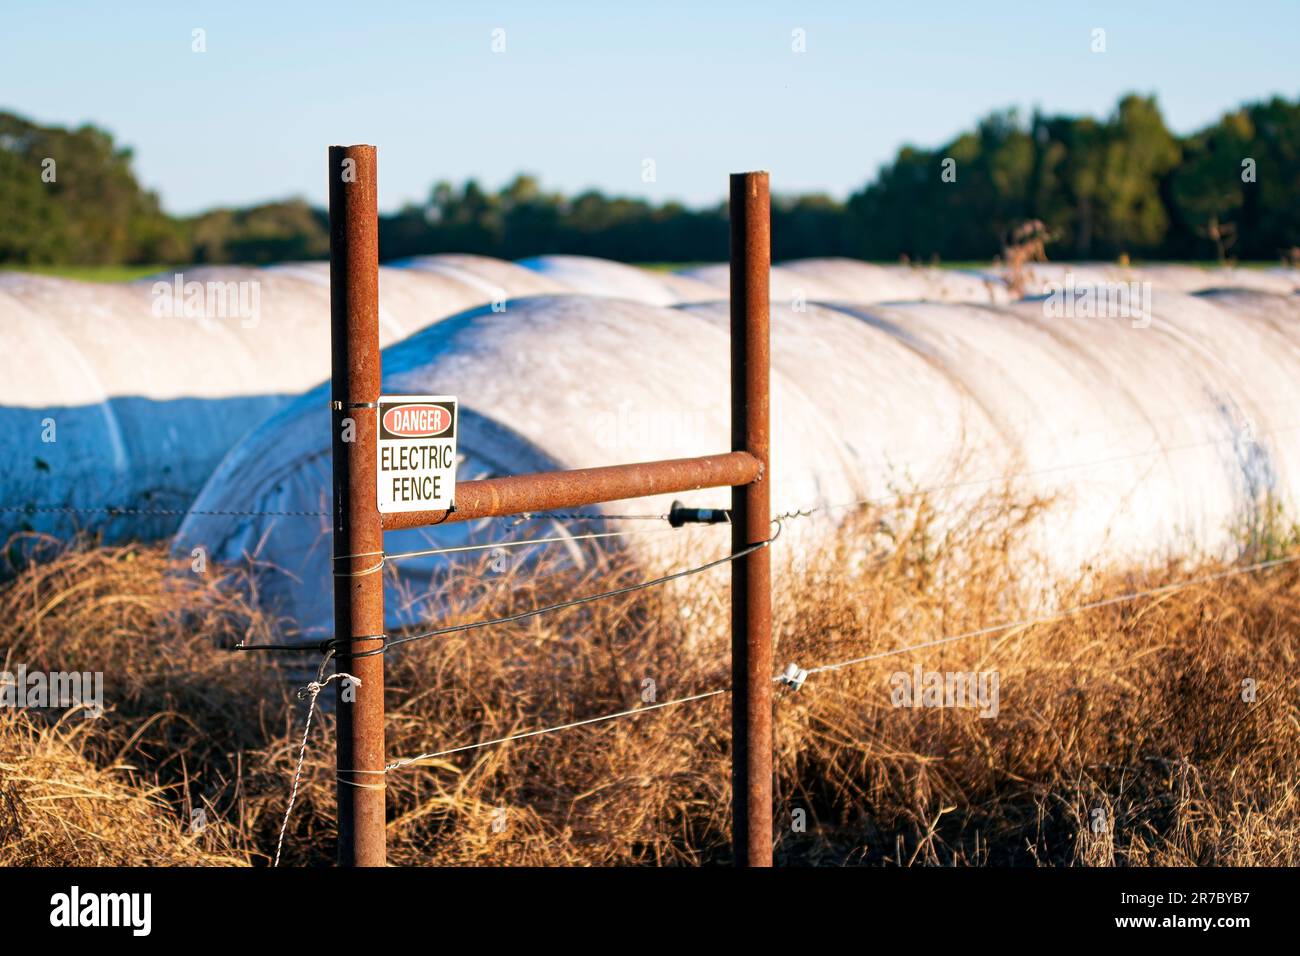 Rows of plastic-wrapped hay bales, known as haylage, behind an electrified fence in a field. Stock Photo